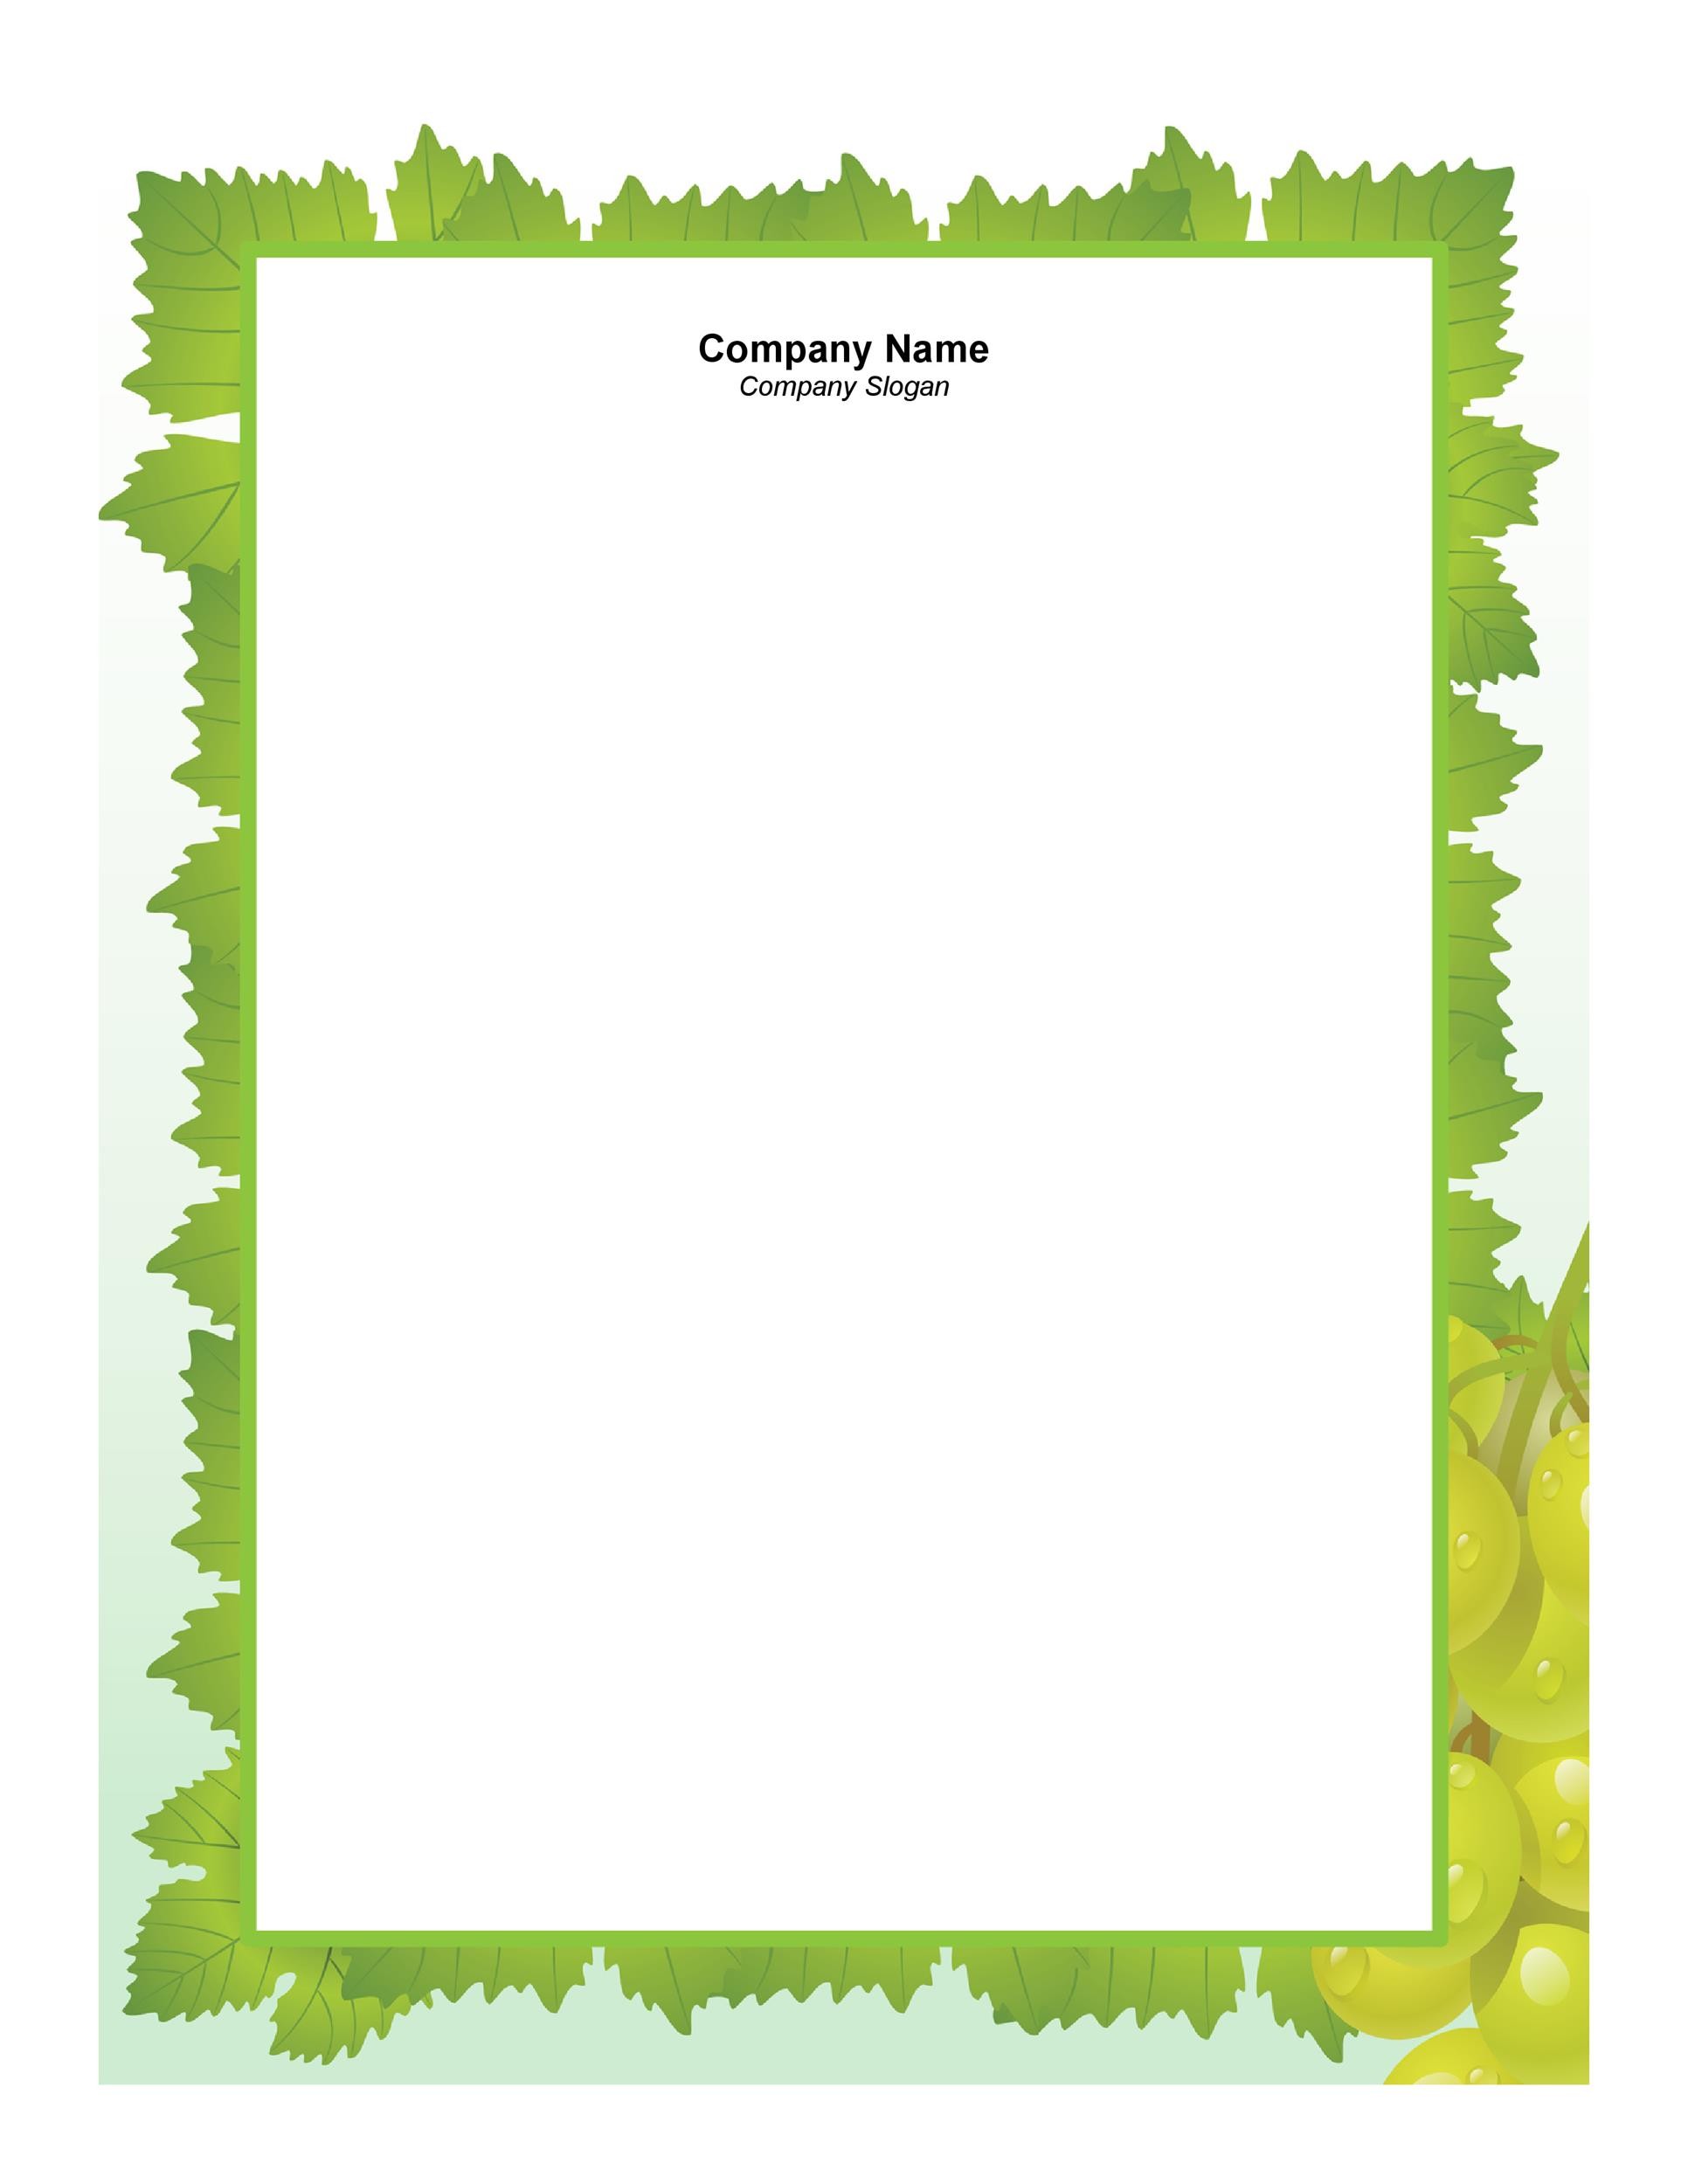 45-free-letterhead-templates-examples-company-business-personal